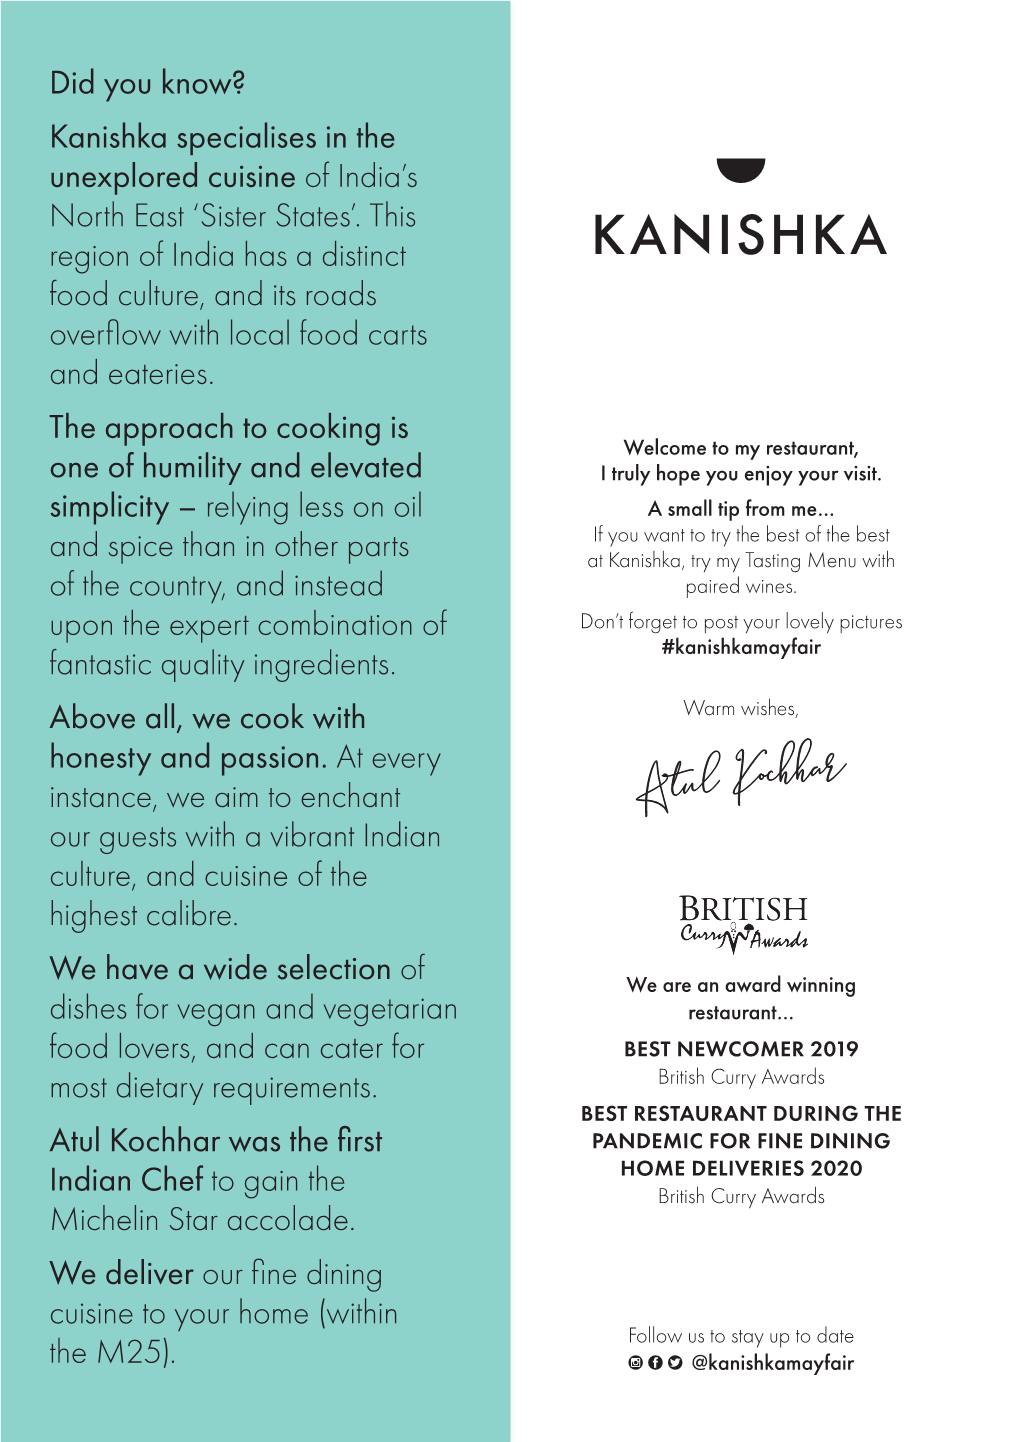 Kanishka Specialises in the Unexplored Cuisine of India's North East